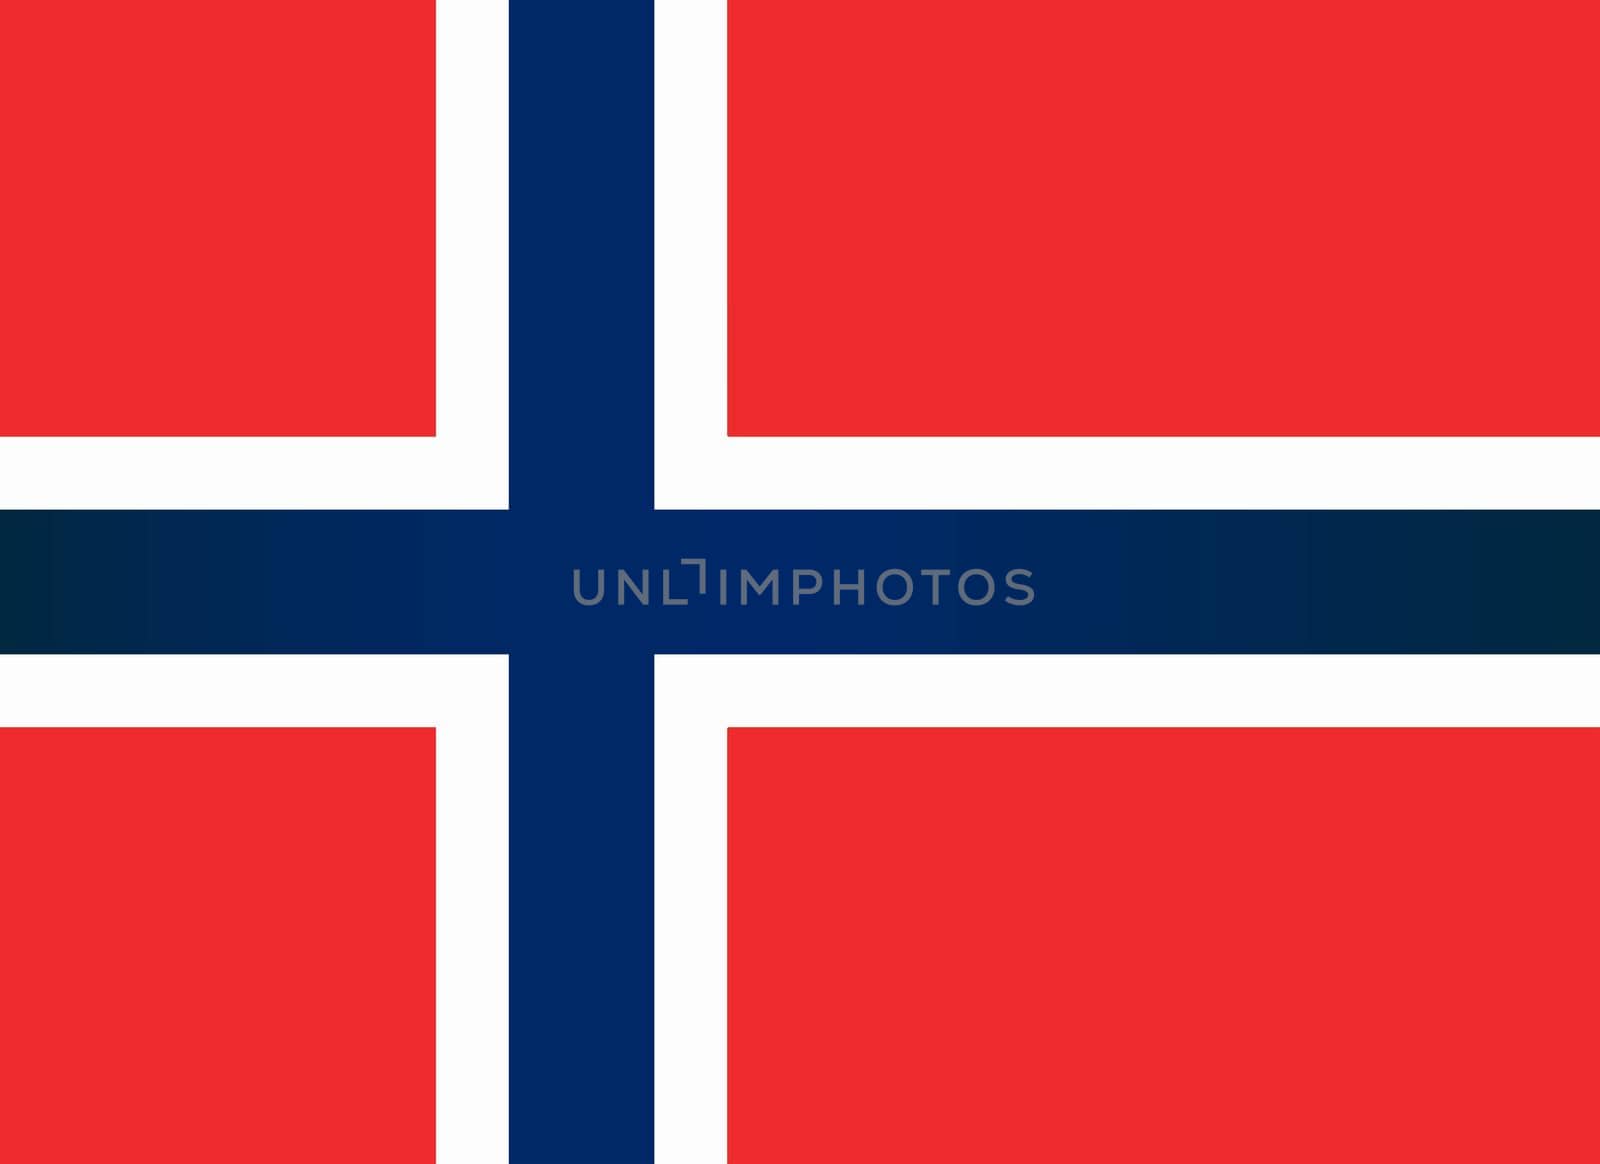 The national flag of the Scandinavian country of Norway